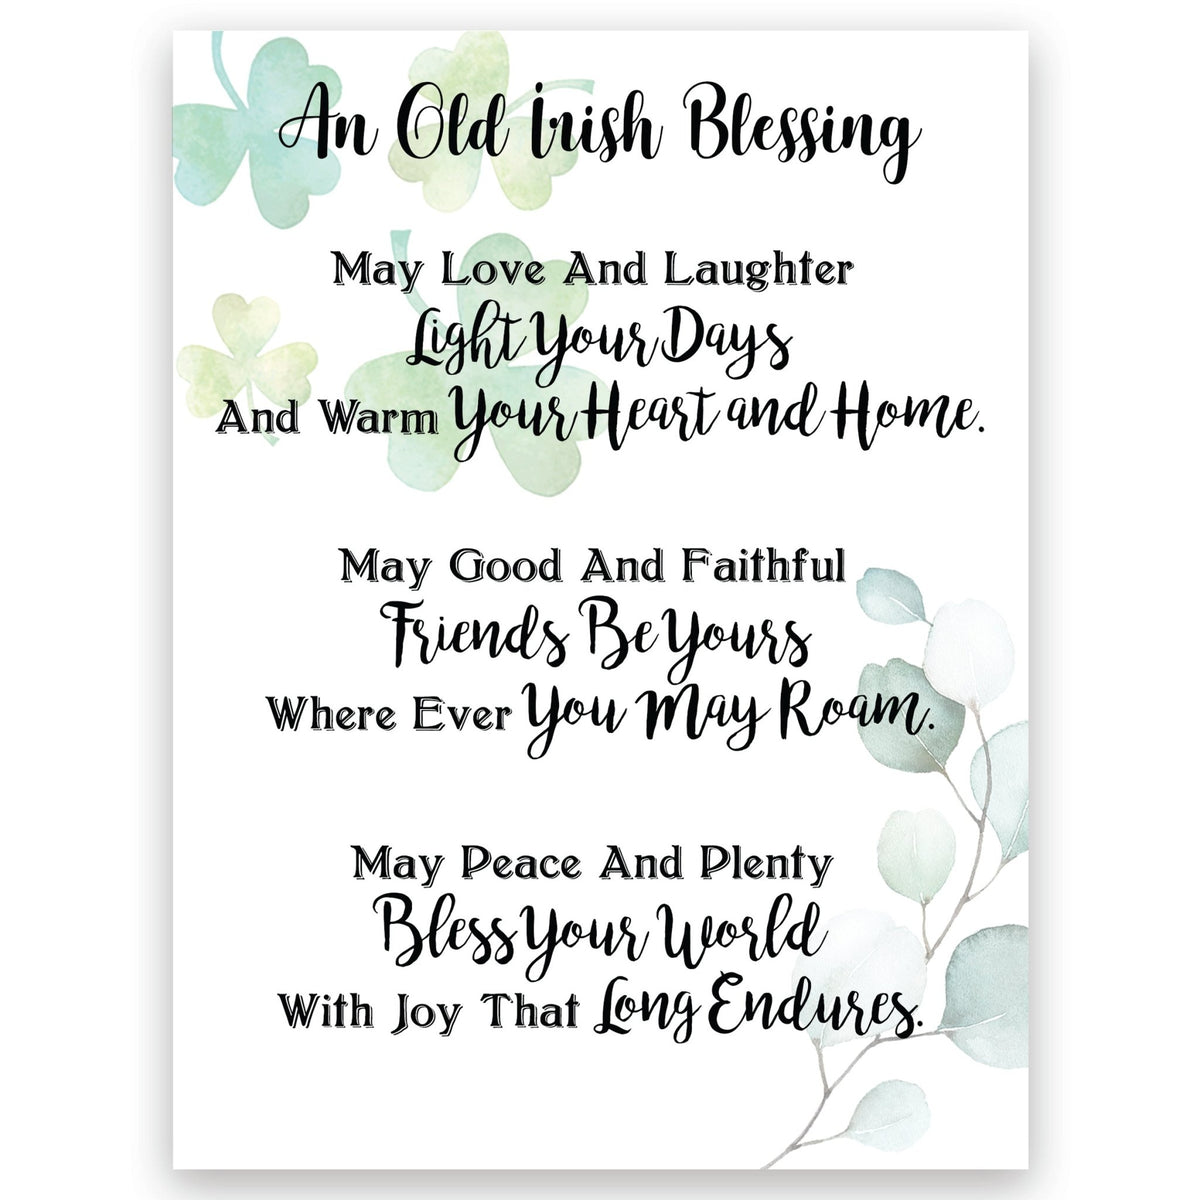 St. Patrick’s Day Irish Everyday Wooden Wall Plaque 6x8 - An Old Irish Blessing - LifeSong Milestones